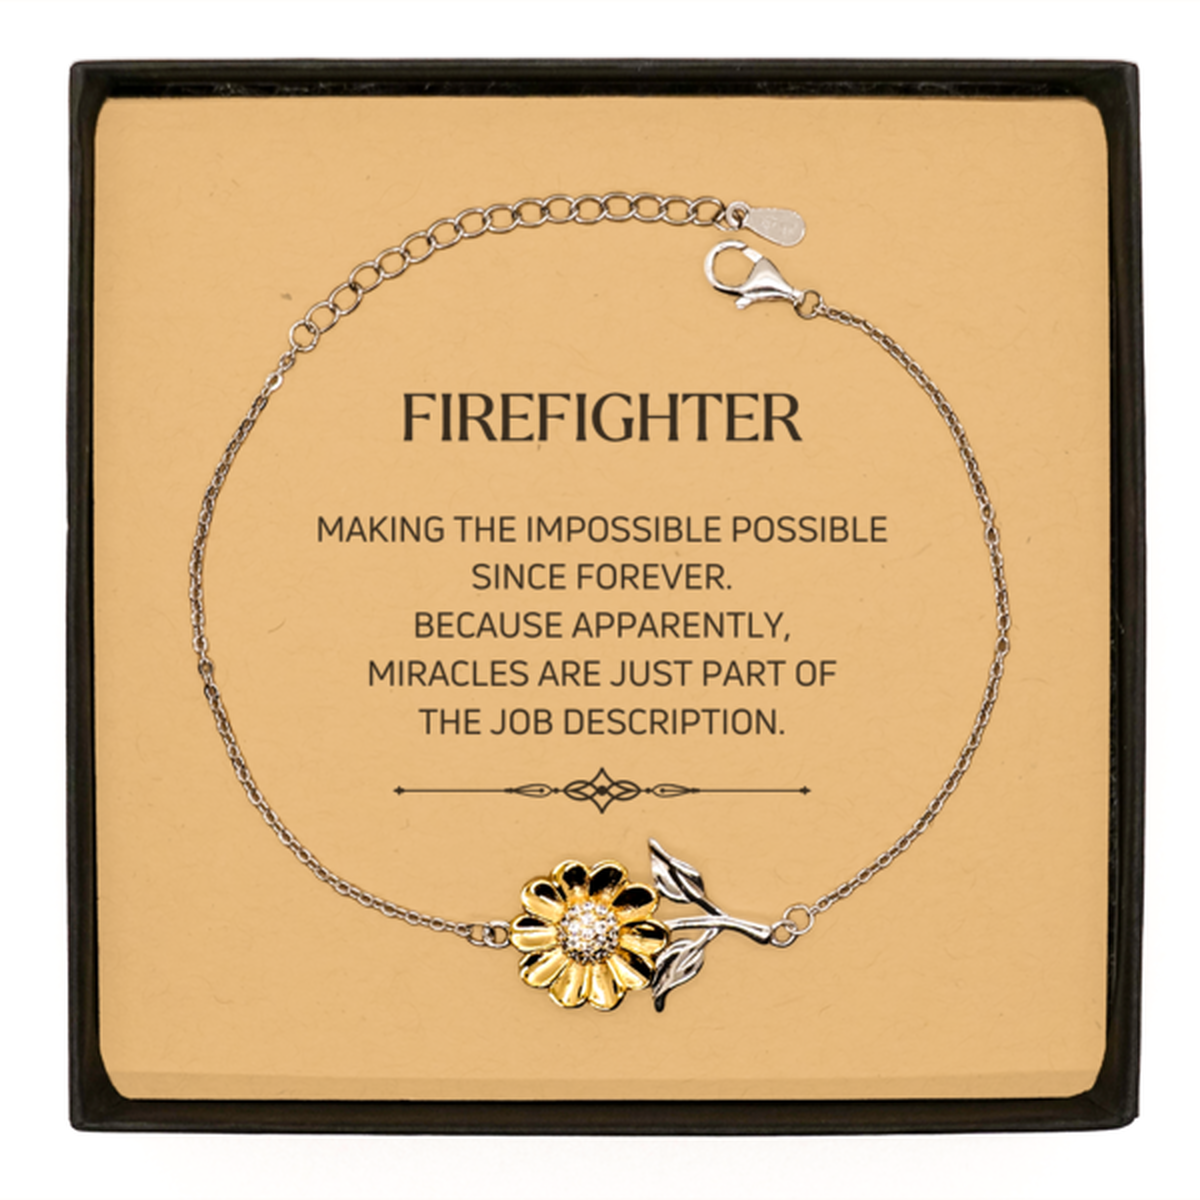 Funny Firefighter Gifts, Miracles are just part of the job description, Inspirational Birthday Sunflower Bracelet For Firefighter, Men, Women, Coworkers, Friends, Boss